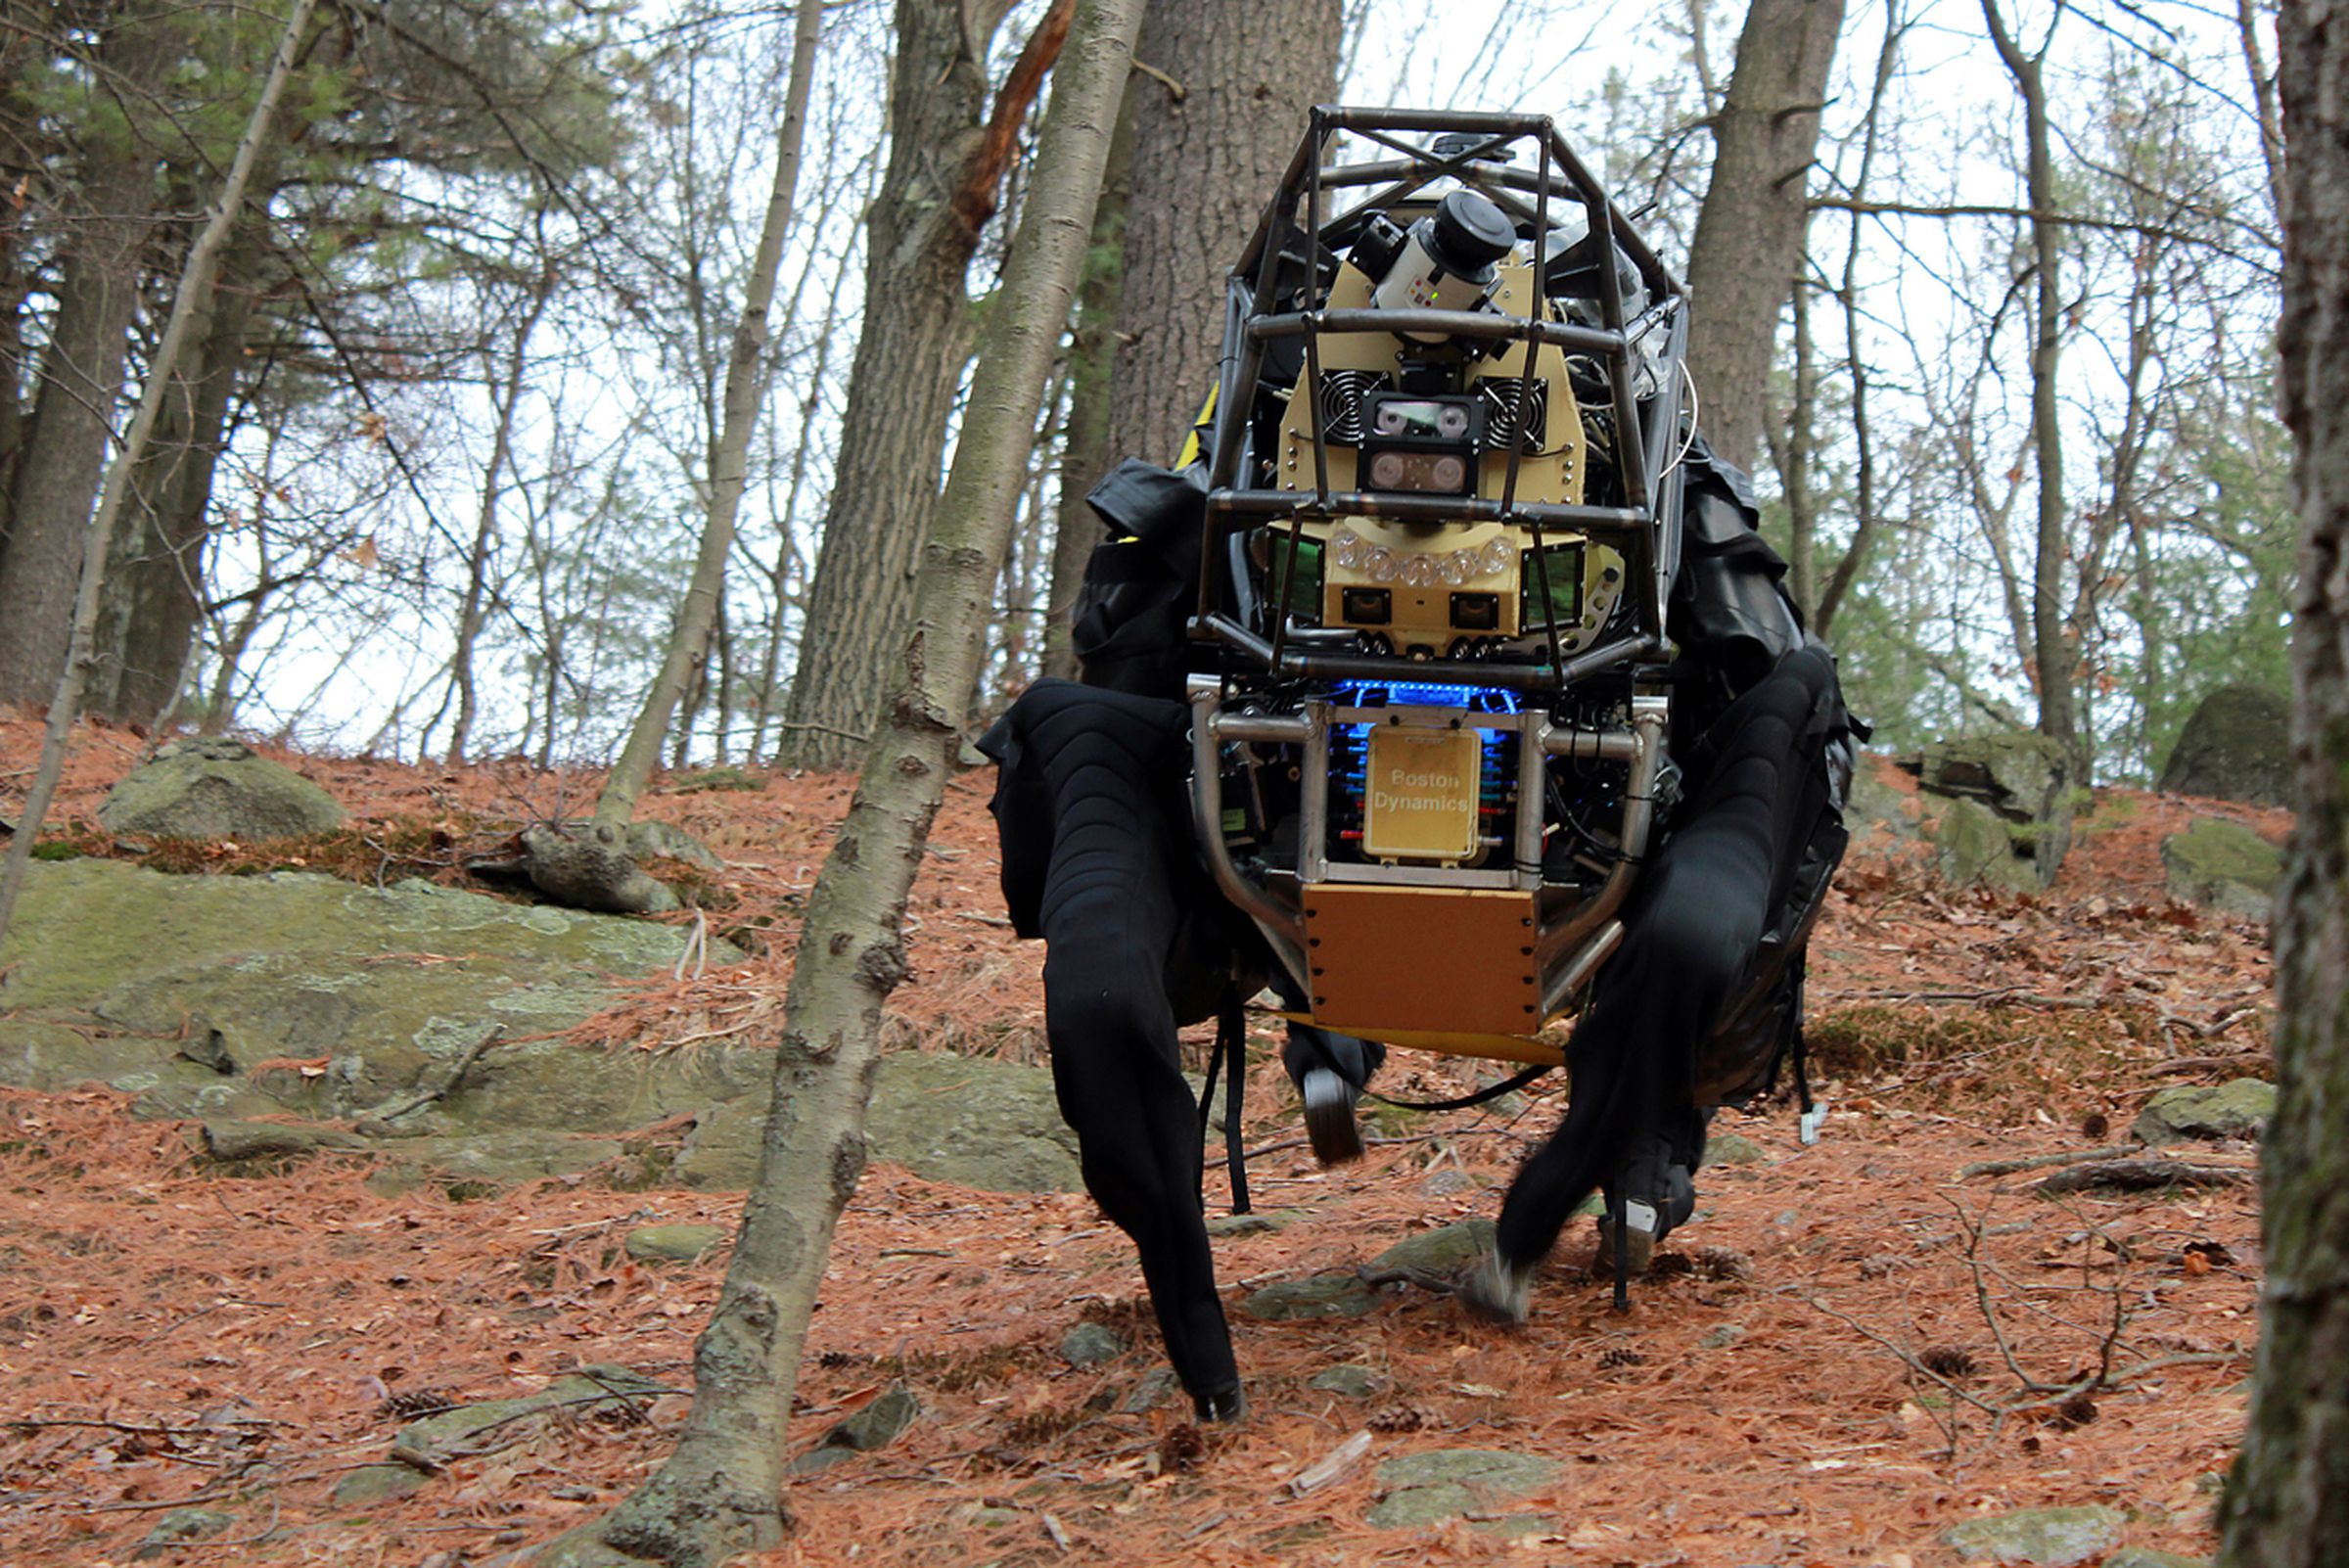 A quadrupedal robot made by Boston Dynamics considered for military use